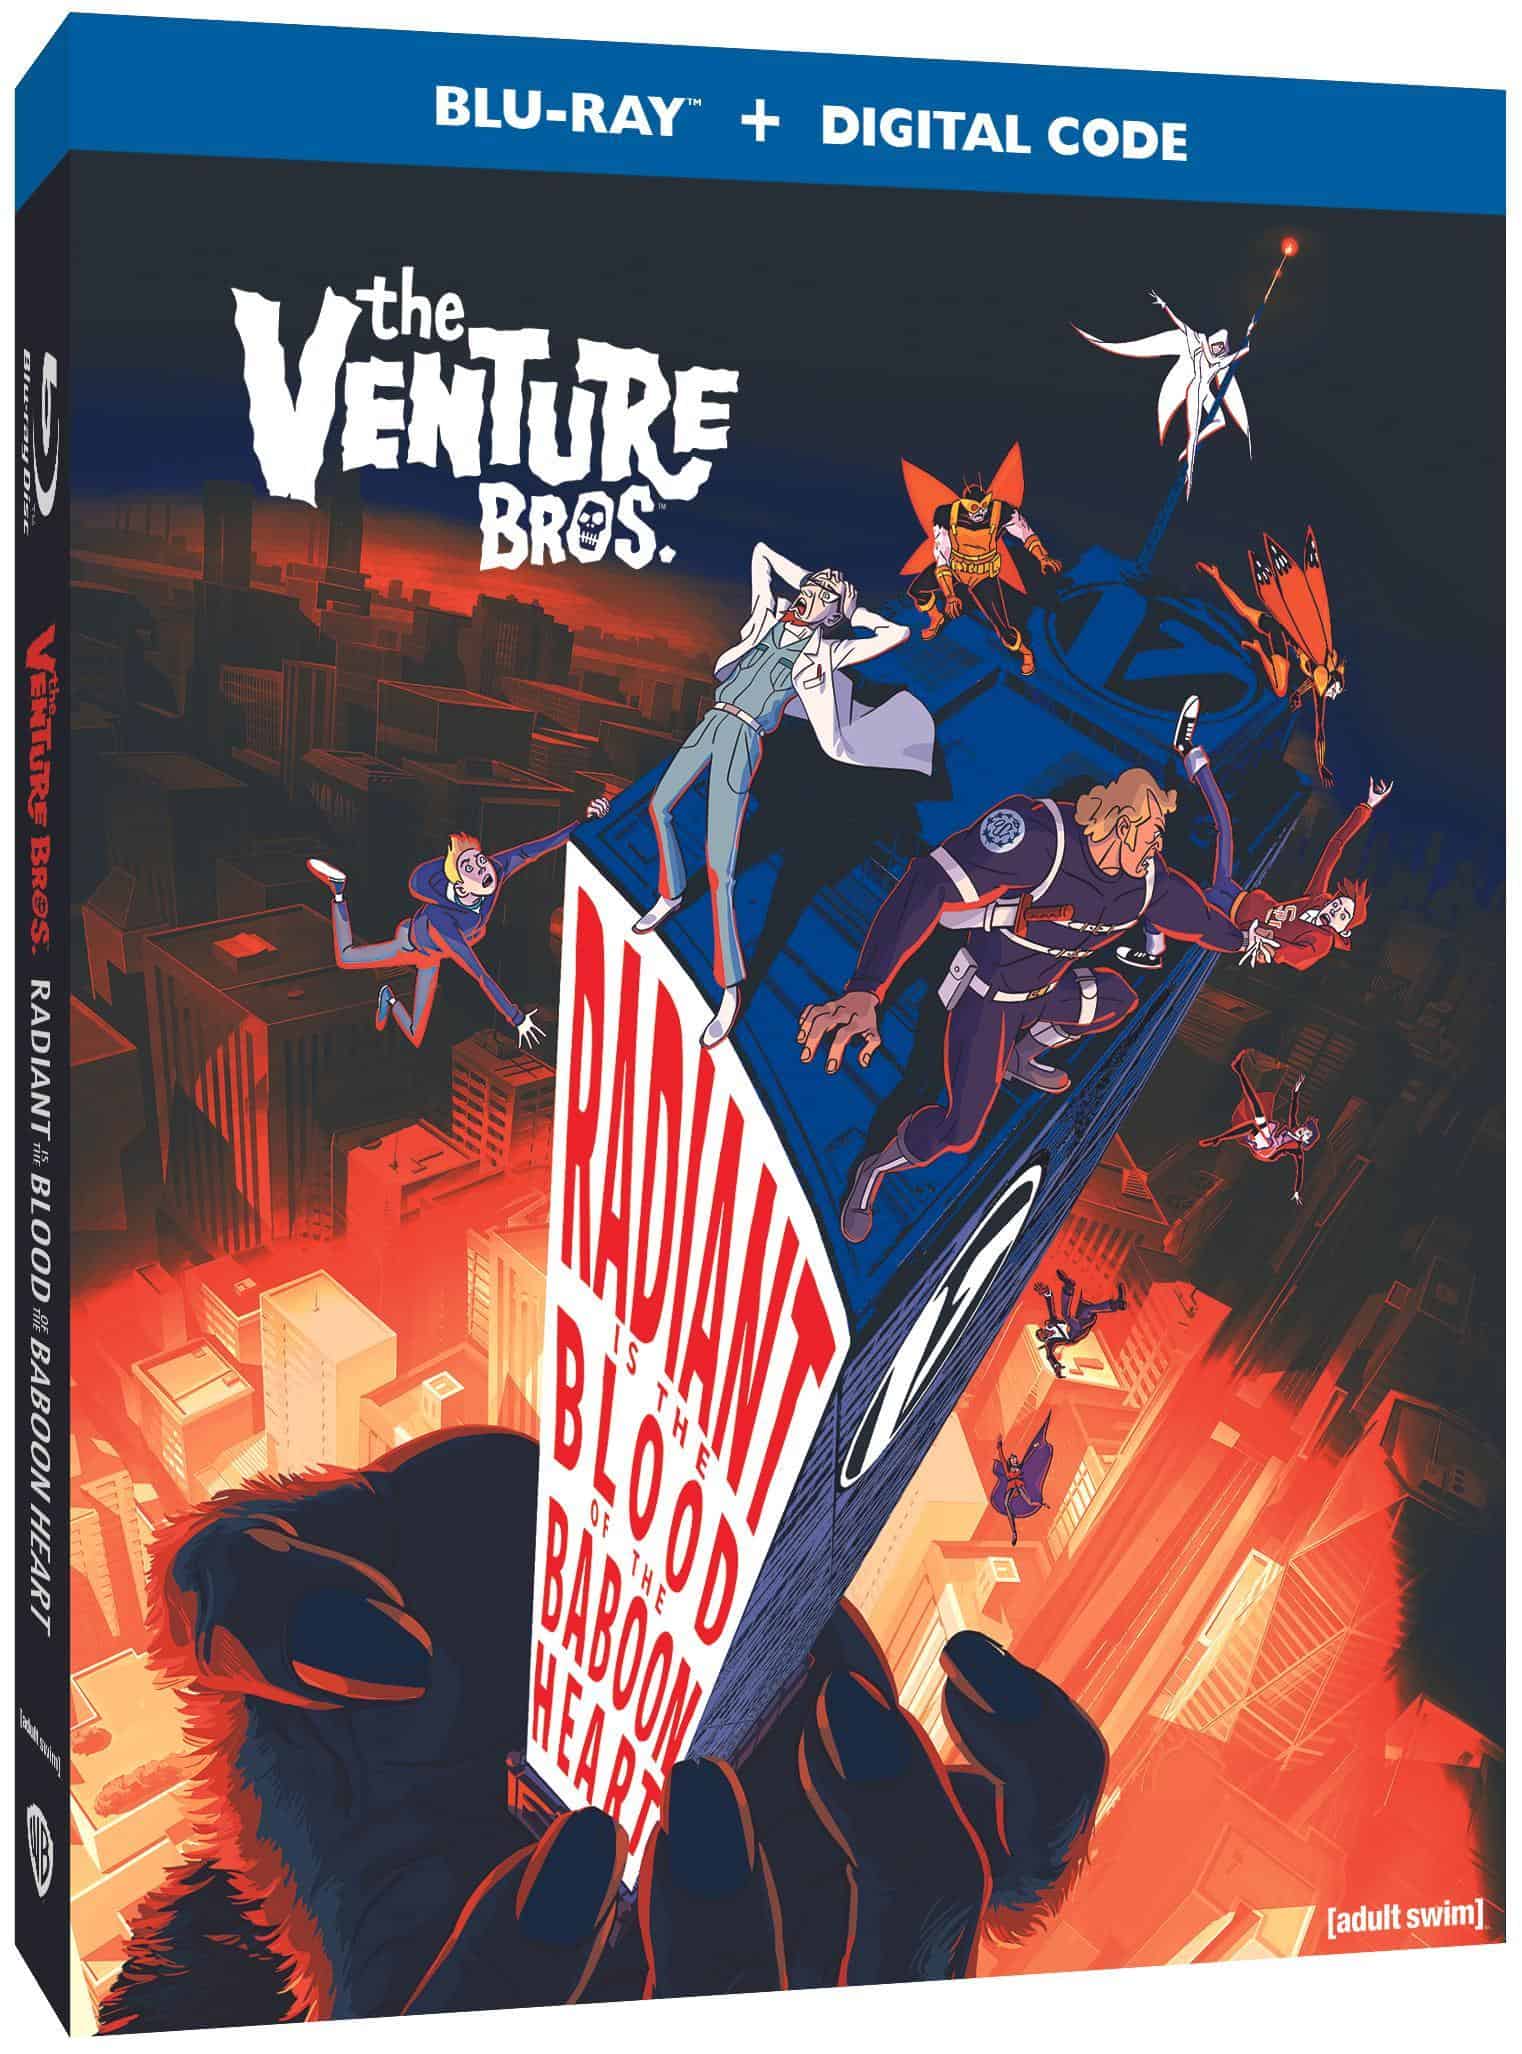 The Venture Bros. Return: Get Ready for New Adventures in Radiant is the Blood of the Baboon Heart! 1